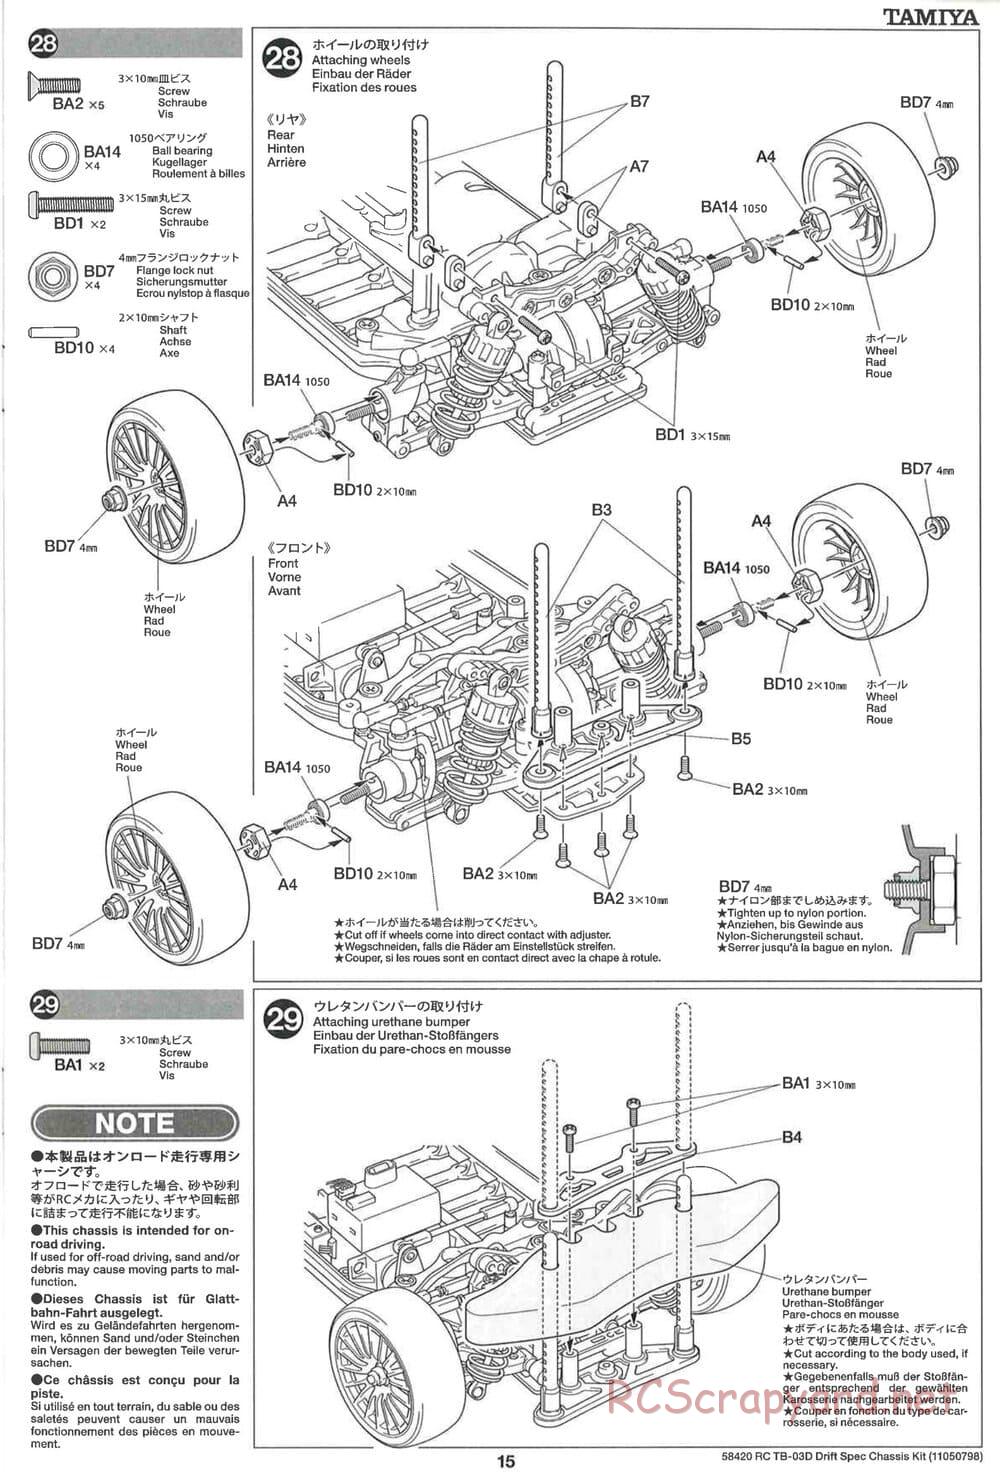 Tamiya - TB-03D HP Drift Spec Chassis - Manual - Page 15